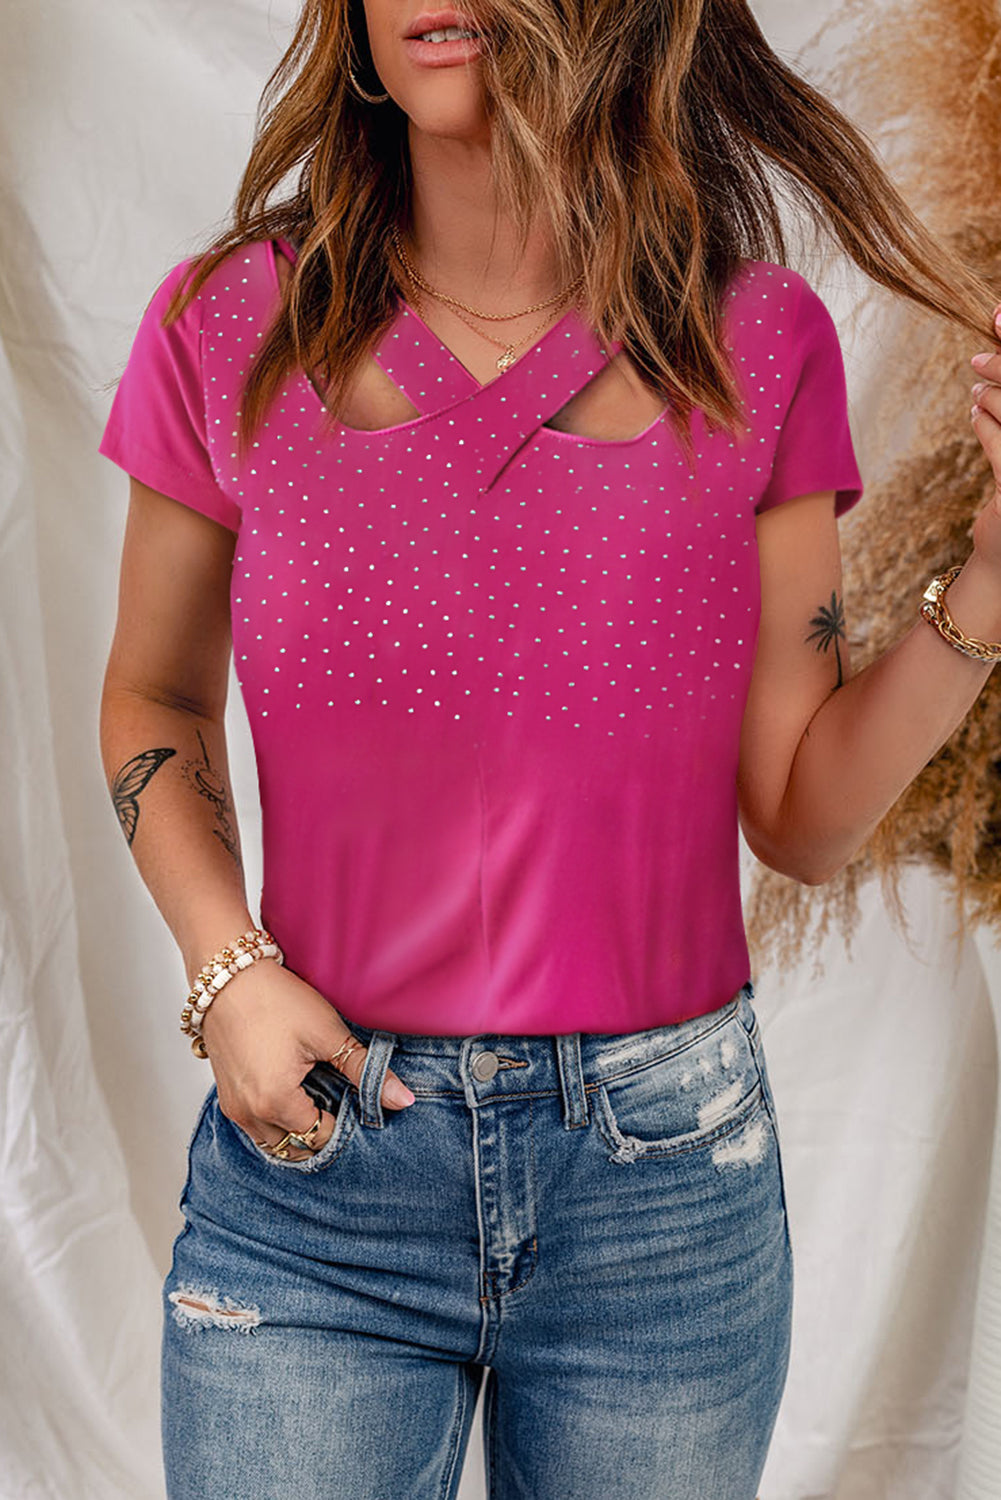 Rhinestone Crisscross Short Sleeve Top - Kawaii Stop - Casual Style, Comfortable, Easy Care, Everyday Wear, Glamorous, Rhinestone Top, Ship From Overseas, Short Sleeve Blouse, Size Guide, Slightly Stretchy, Solid Color, Sparkling Details, Stylish Apparel, SYNZ, T-Shirt, T-Shirts, Tee, Versatile, Women's Clothing, Women's Top